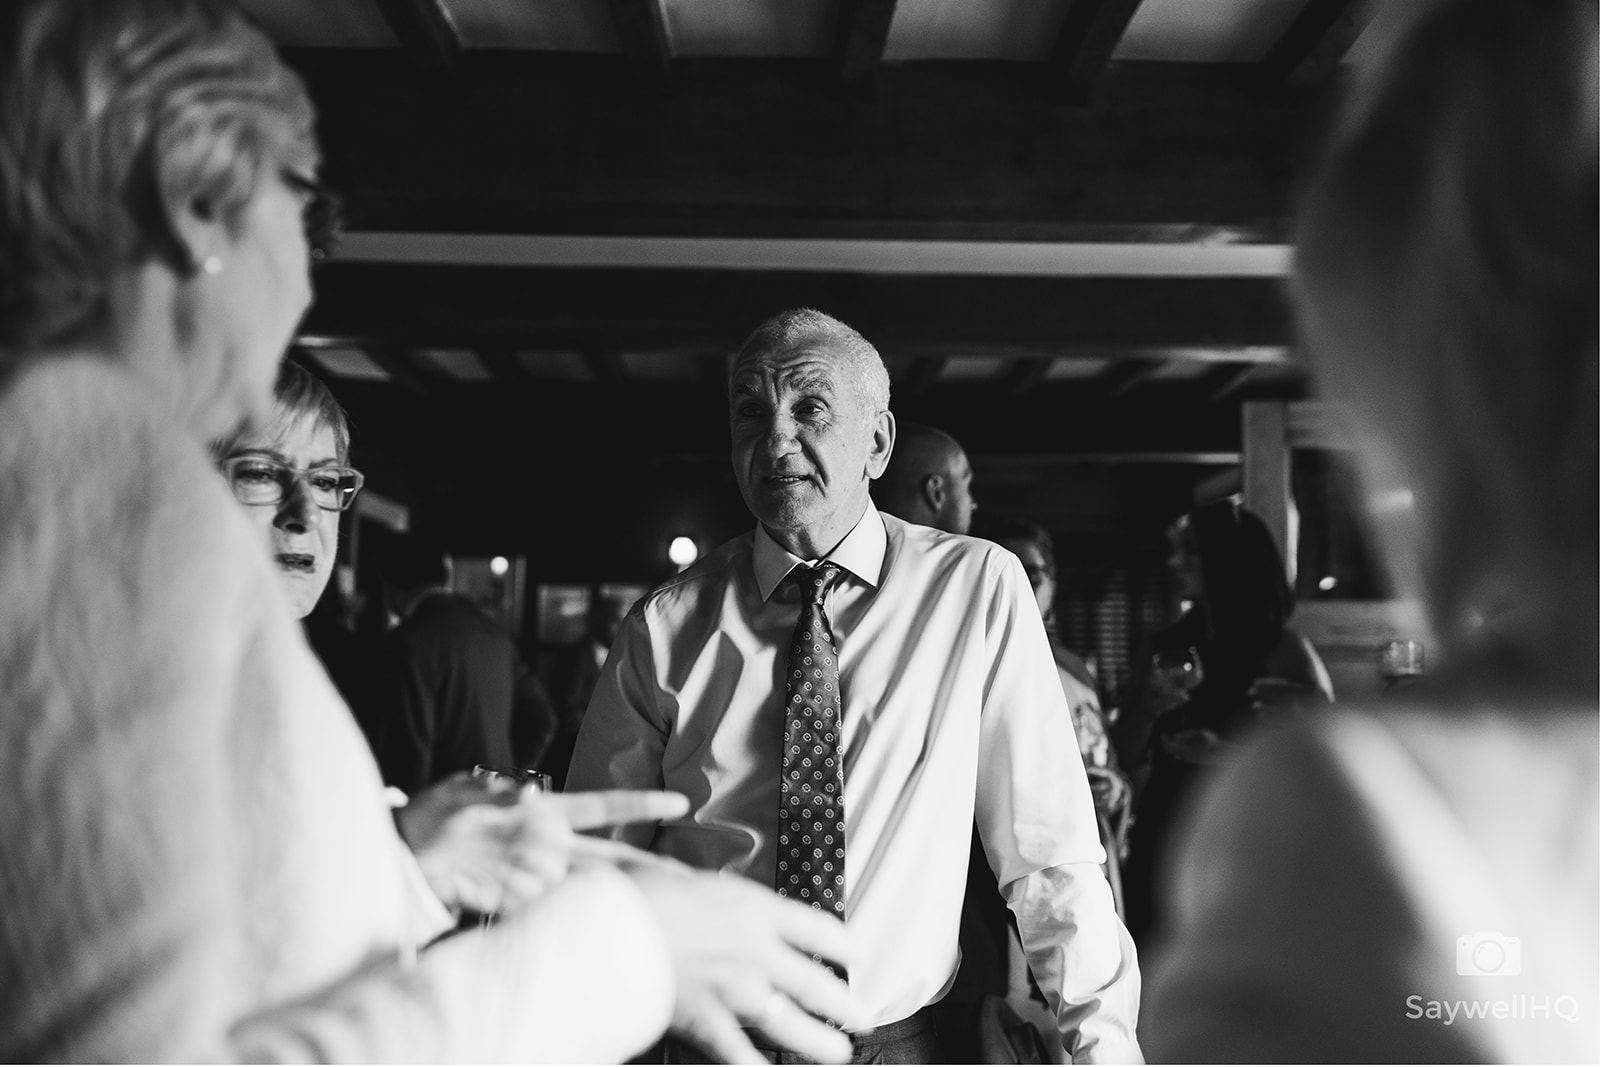 The Chequers Inn Wedding Photography - the wedding guest chatting in the bar at the pub